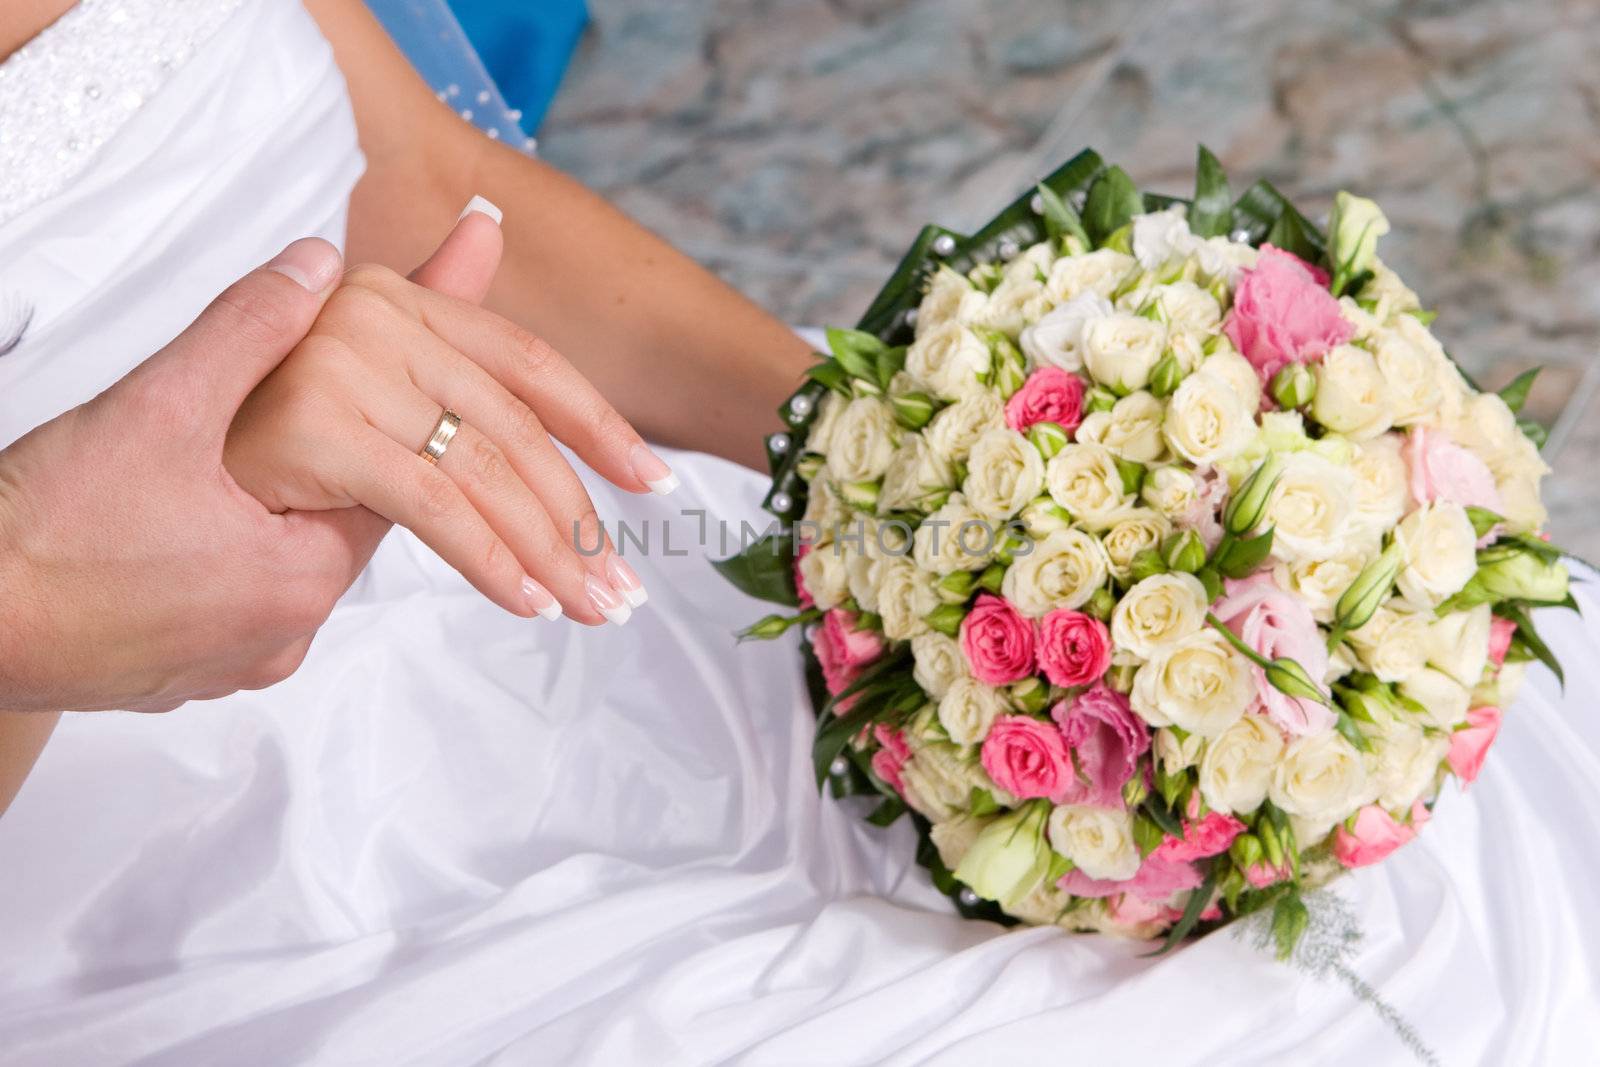 hands with gold rings, dress and flower bouquet